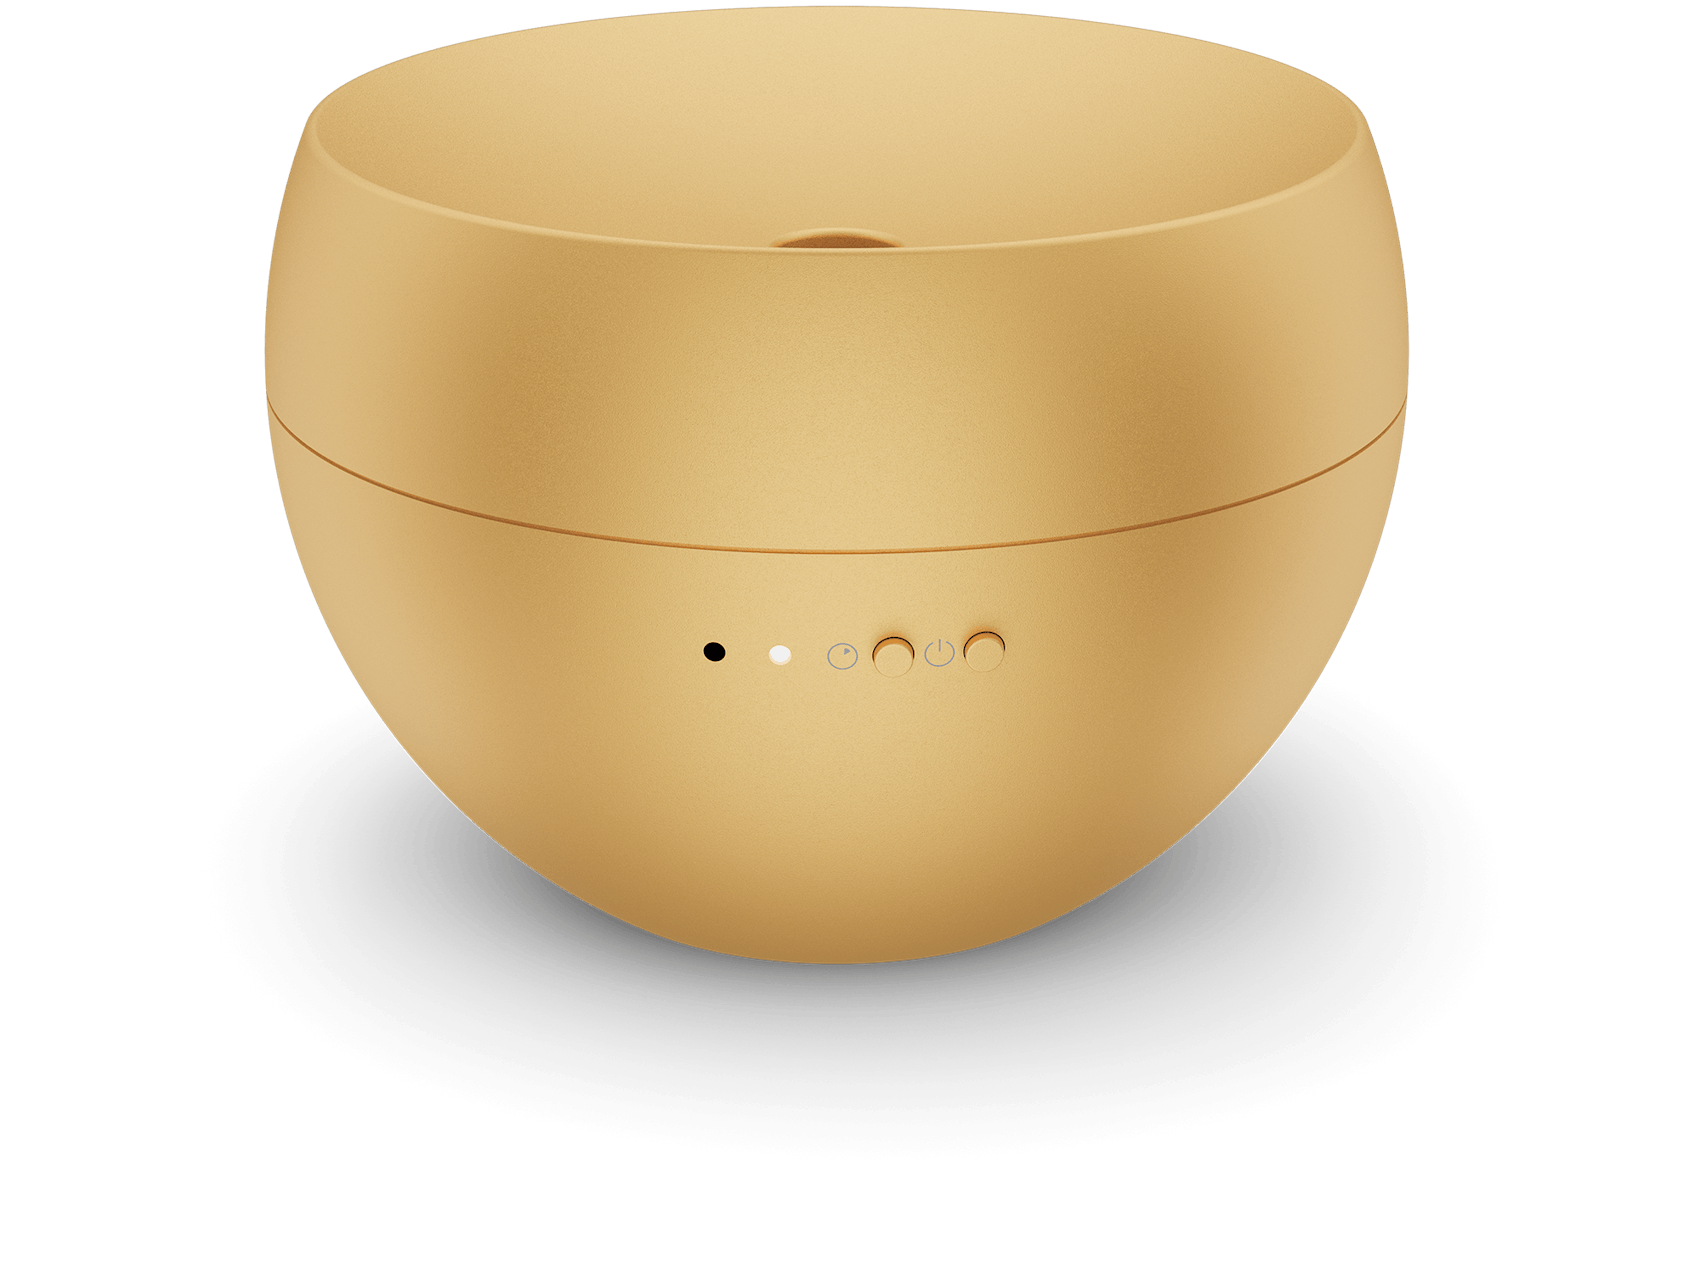 Jasmin aroma diffuser by Stadler Form in gold as perspective view